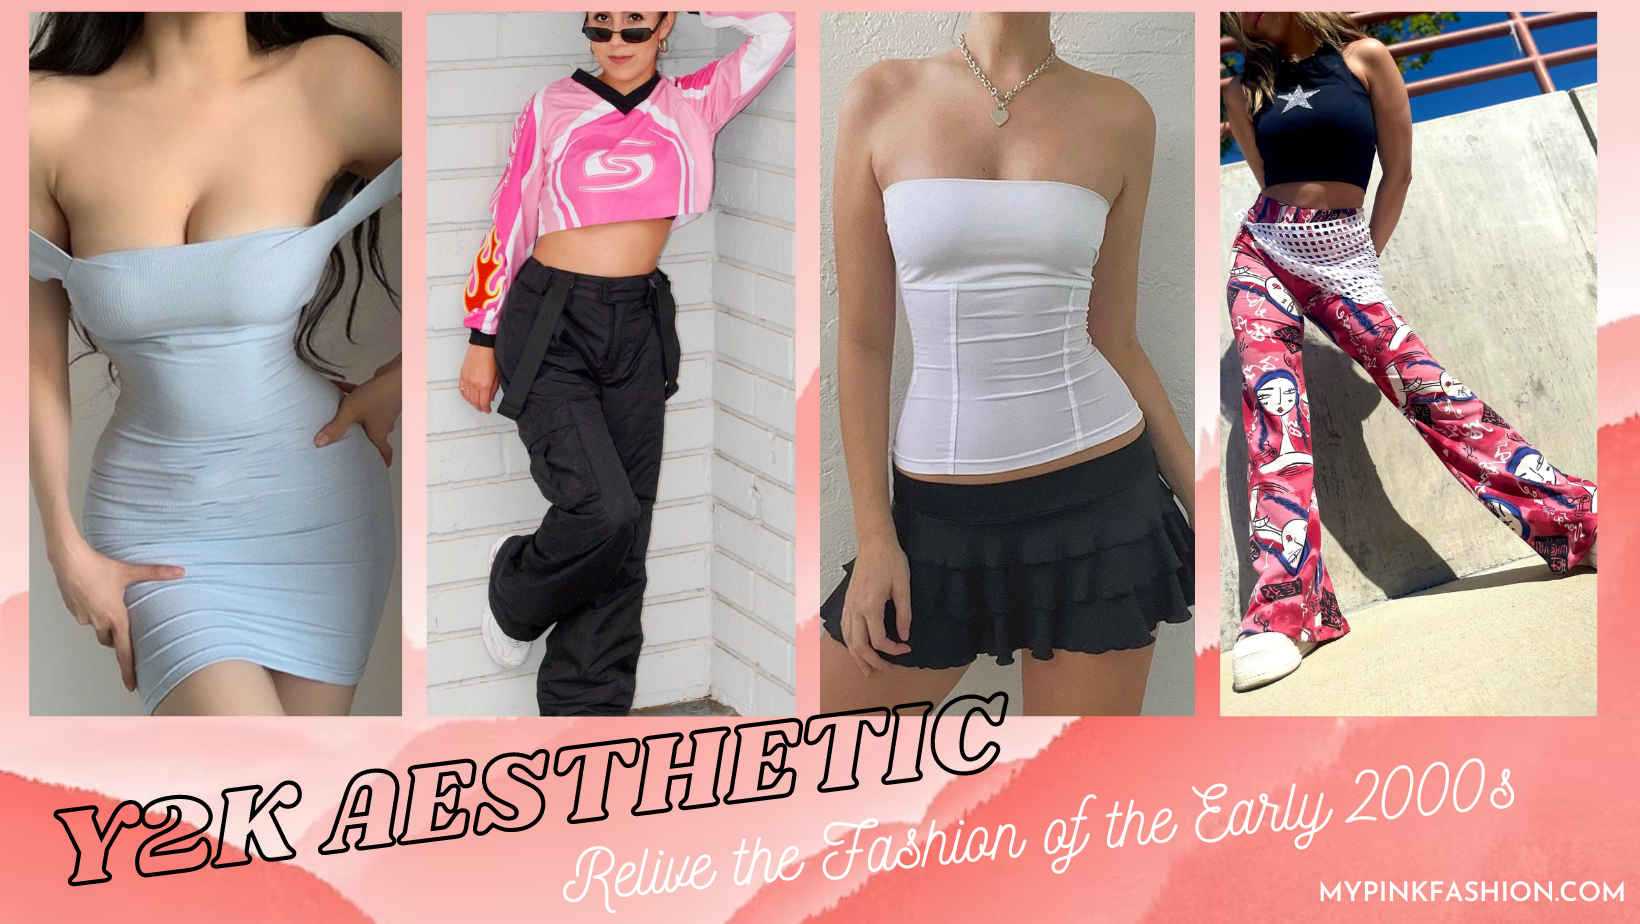 Y2K Aesthetic: Relive the Fashion of the Early 2000s